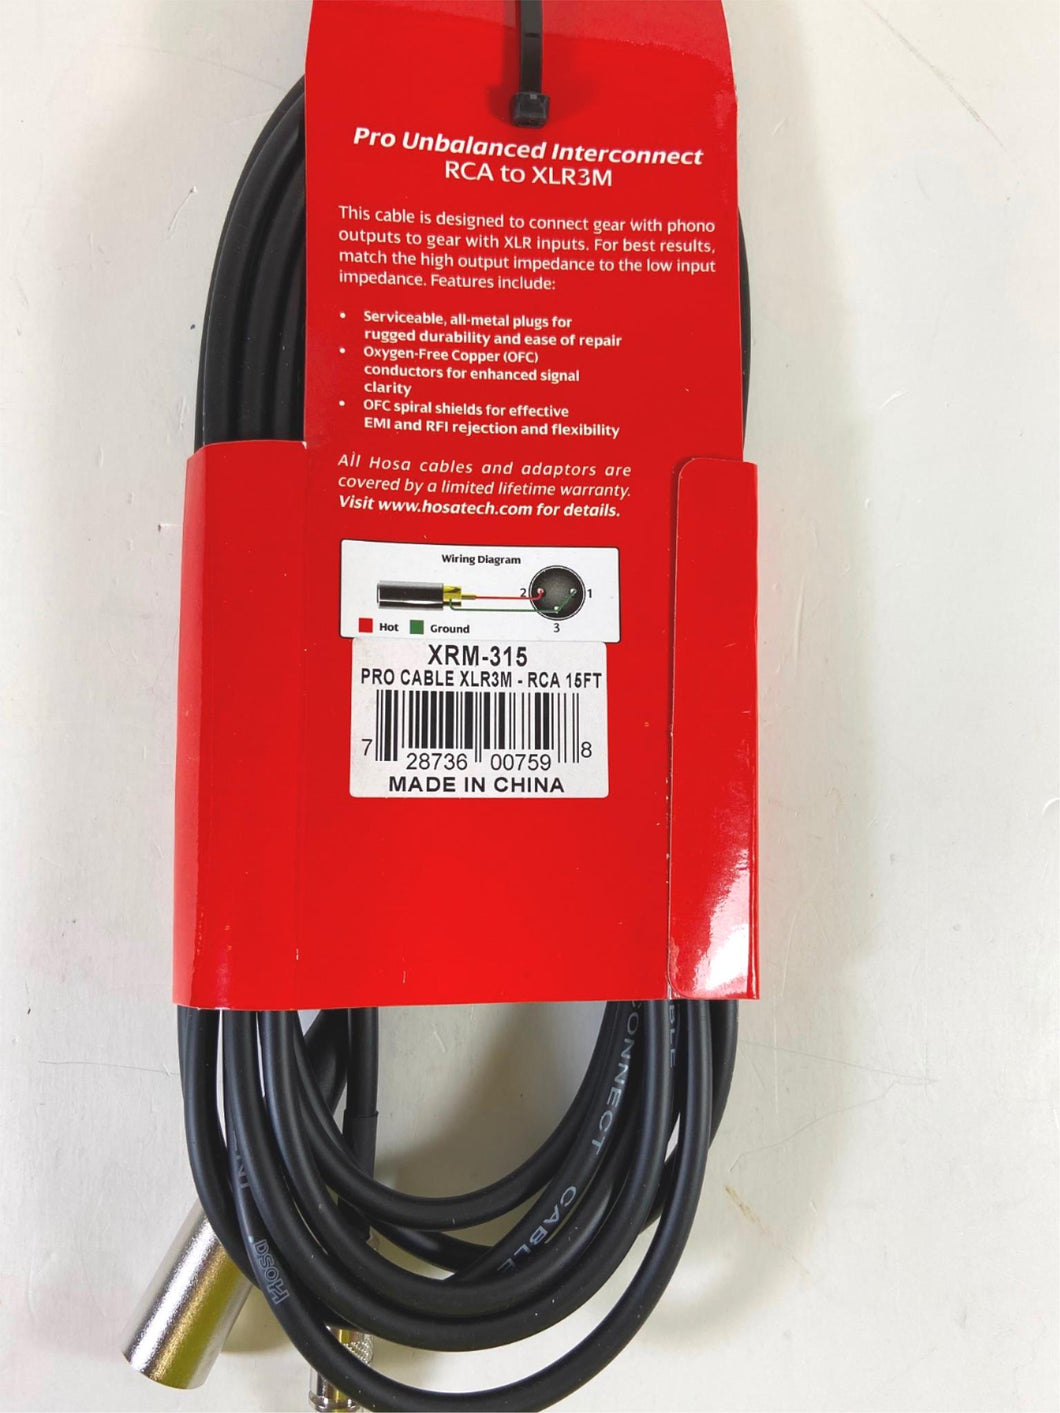 NEW! Hosa Technology XRM-315 RCA to XLR3M Pro Unbalanced Interconnect Cable 15ft